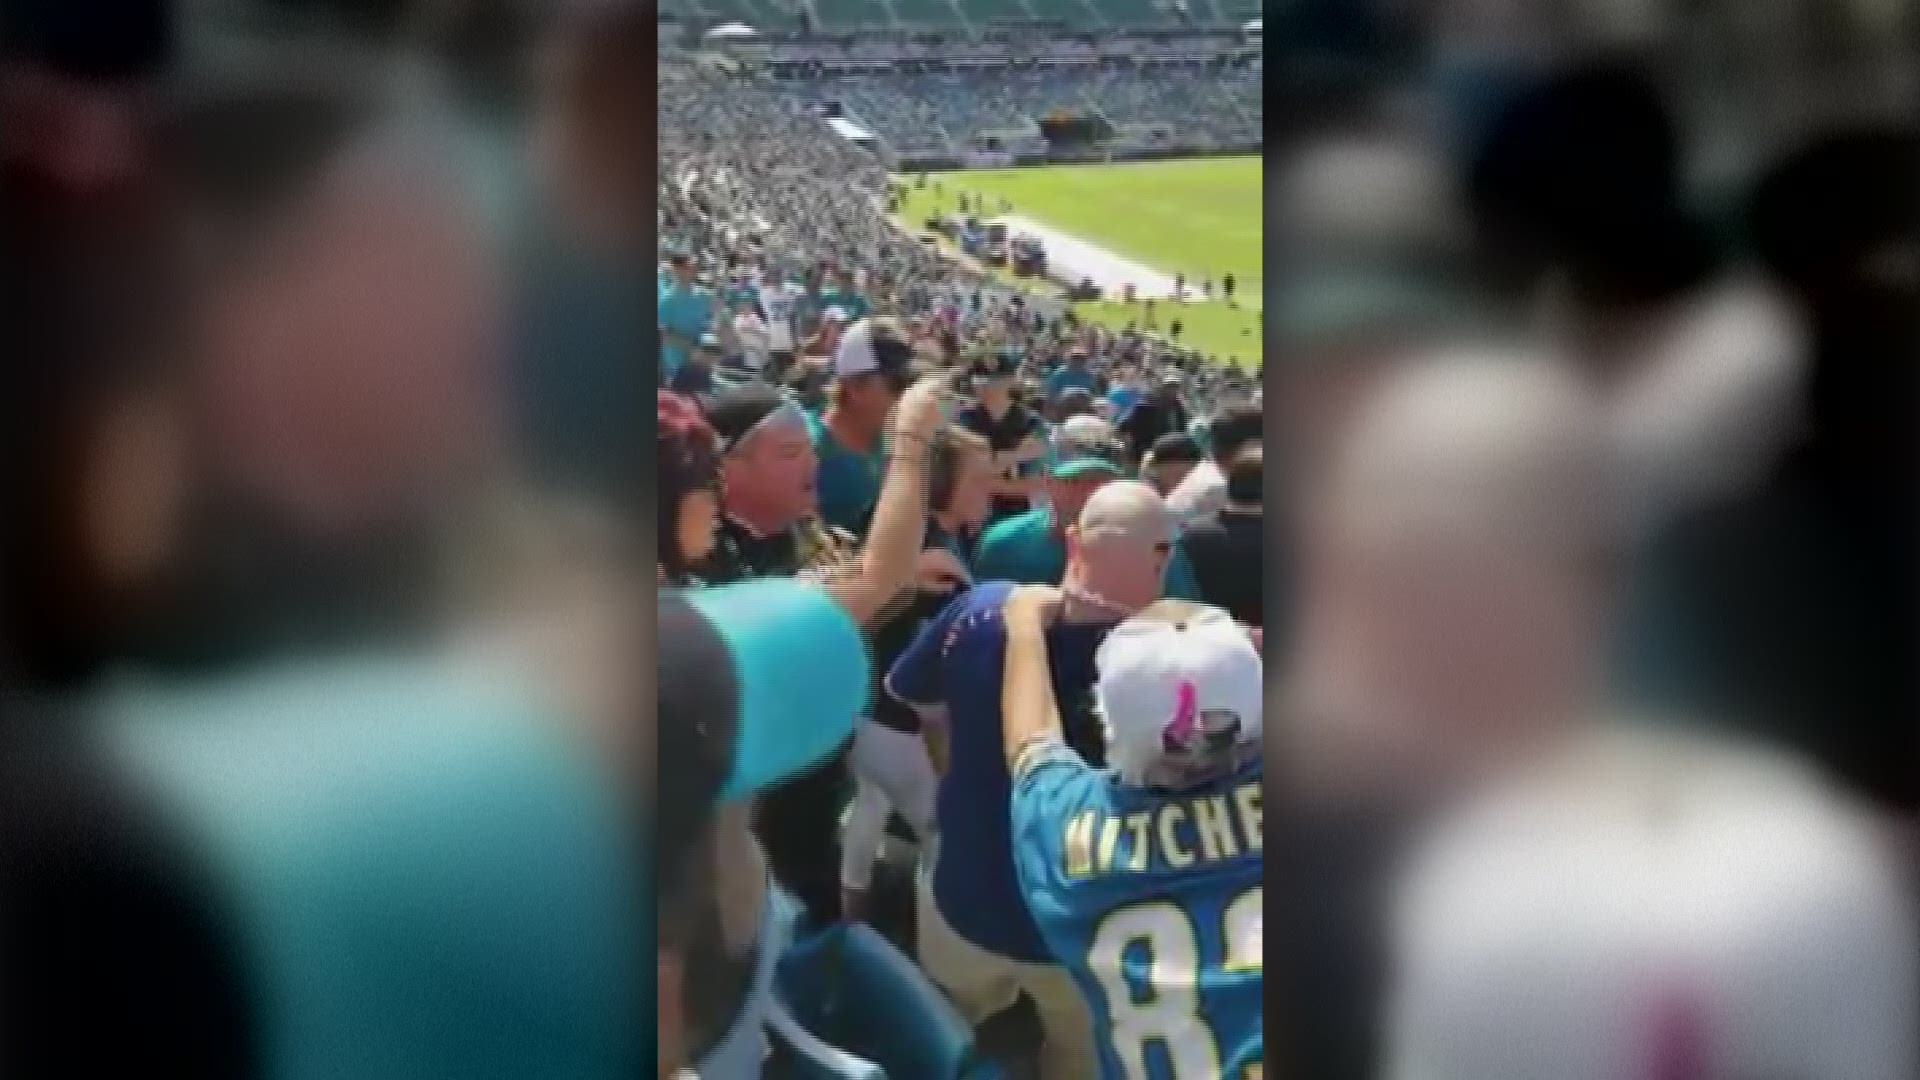 A Jags fan can be seen sucker punching a Texans fan during the game. Video courtesy of Richard Elliott.